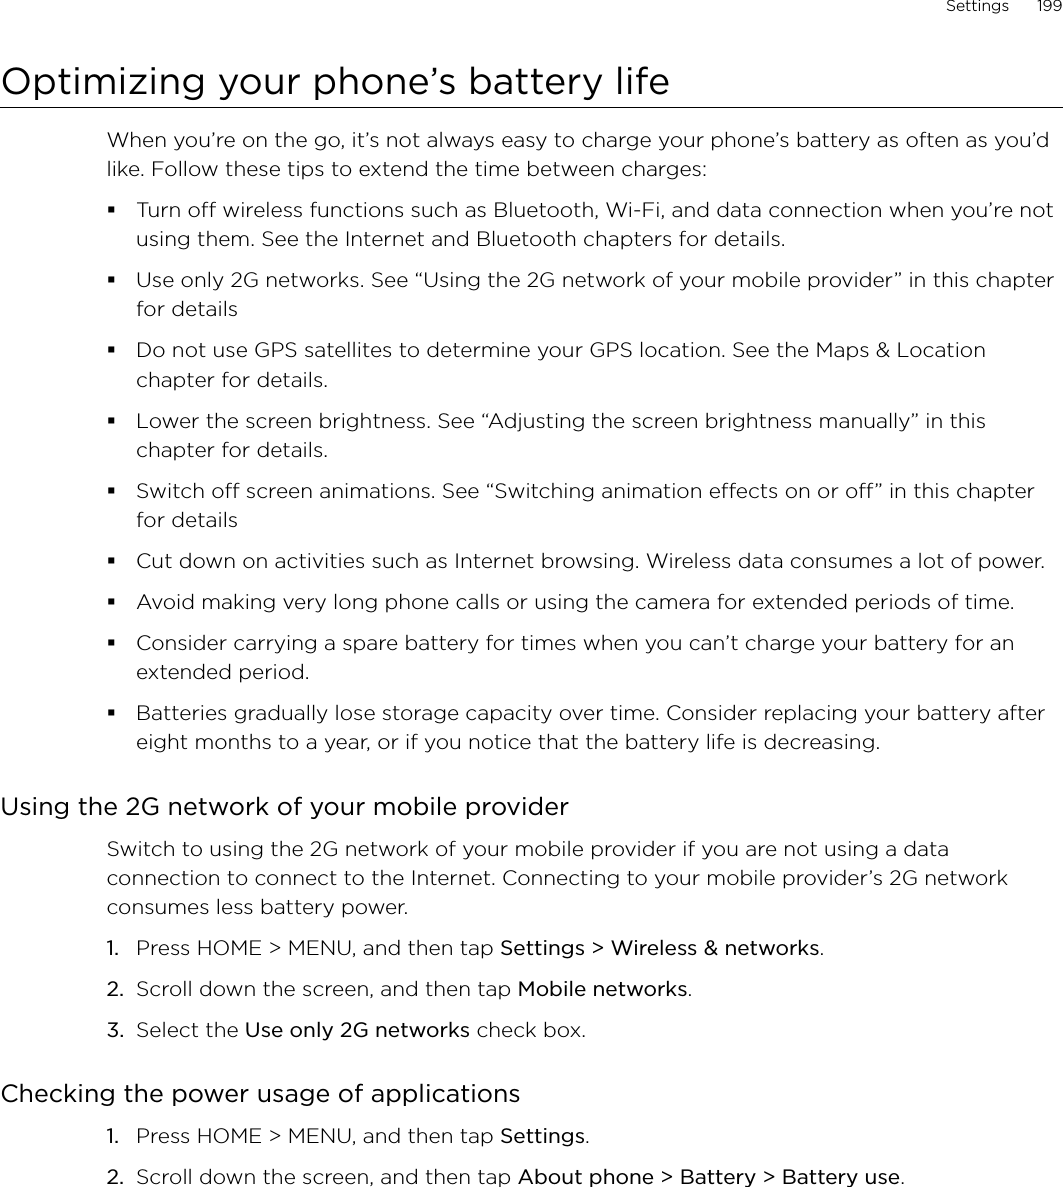 Settings      199Optimizing your phone’s battery lifeWhen you’re on the go, it’s not always easy to charge your phone’s battery as often as you’d like. Follow these tips to extend the time between charges: Turn off wireless functions such as Bluetooth, Wi-Fi, and data connection when you’re not using them. See the Internet and Bluetooth chapters for details.Use only 2G networks. See “Using the 2G network of your mobile provider” in this chapter for detailsDo not use GPS satellites to determine your GPS location. See the Maps &amp; Location chapter for details. Lower the screen brightness. See “Adjusting the screen brightness manually” in this chapter for details.Switch off screen animations. See “Switching animation effects on or off” in this chapter for detailsCut down on activities such as Internet browsing. Wireless data consumes a lot of power.Avoid making very long phone calls or using the camera for extended periods of time.Consider carrying a spare battery for times when you can’t charge your battery for an extended period.Batteries gradually lose storage capacity over time. Consider replacing your battery after eight months to a year, or if you notice that the battery life is decreasing.Using the 2G network of your mobile providerSwitch to using the 2G network of your mobile provider if you are not using a data connection to connect to the Internet. Connecting to your mobile provider’s 2G network consumes less battery power. Press HOME &gt; MENU, and then tap Settings &gt; Wireless &amp; networks.Scroll down the screen, and then tap Mobile networks.Select the Use only 2G networks check box. Checking the power usage of applicationsPress HOME &gt; MENU, and then tap Settings.Scroll down the screen, and then tap About phone &gt; Battery &gt; Battery use.1.2.3.1.2.